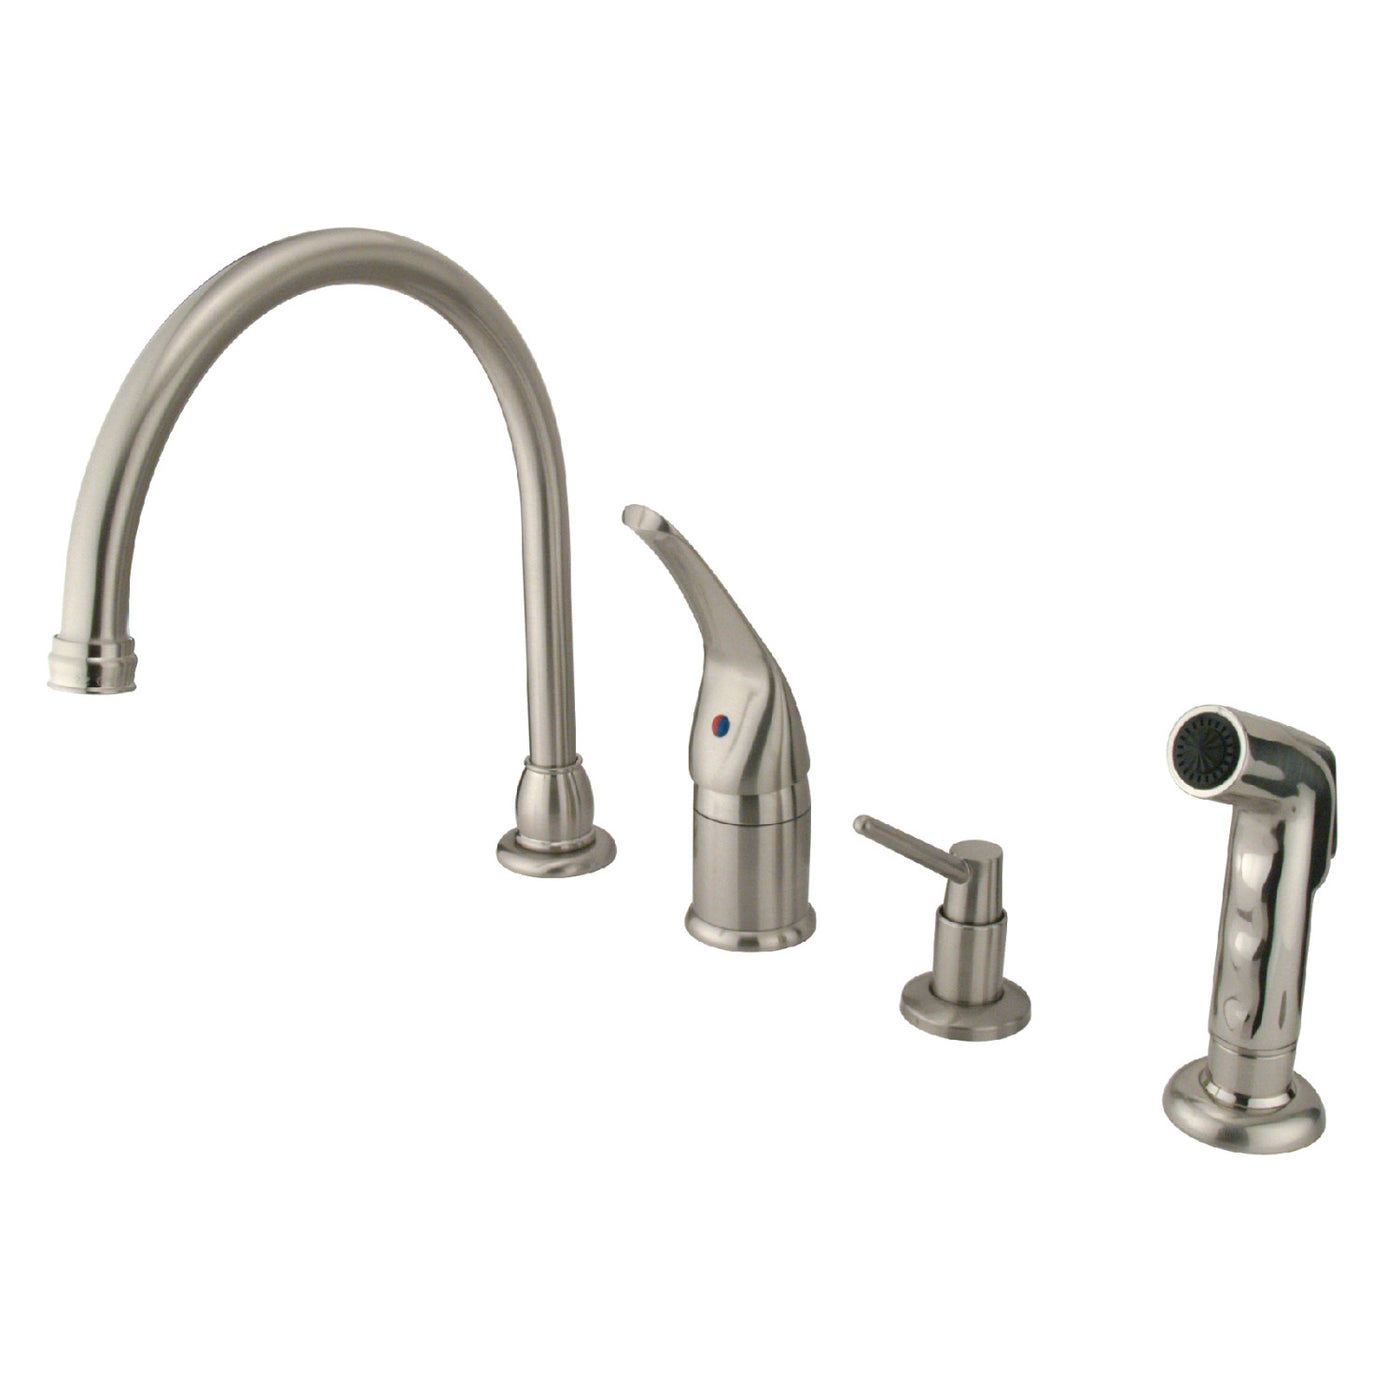 Elements of Design EB828K8 Single-Handle Widespread Kitchen Faucet Combo, Brushed Nickel